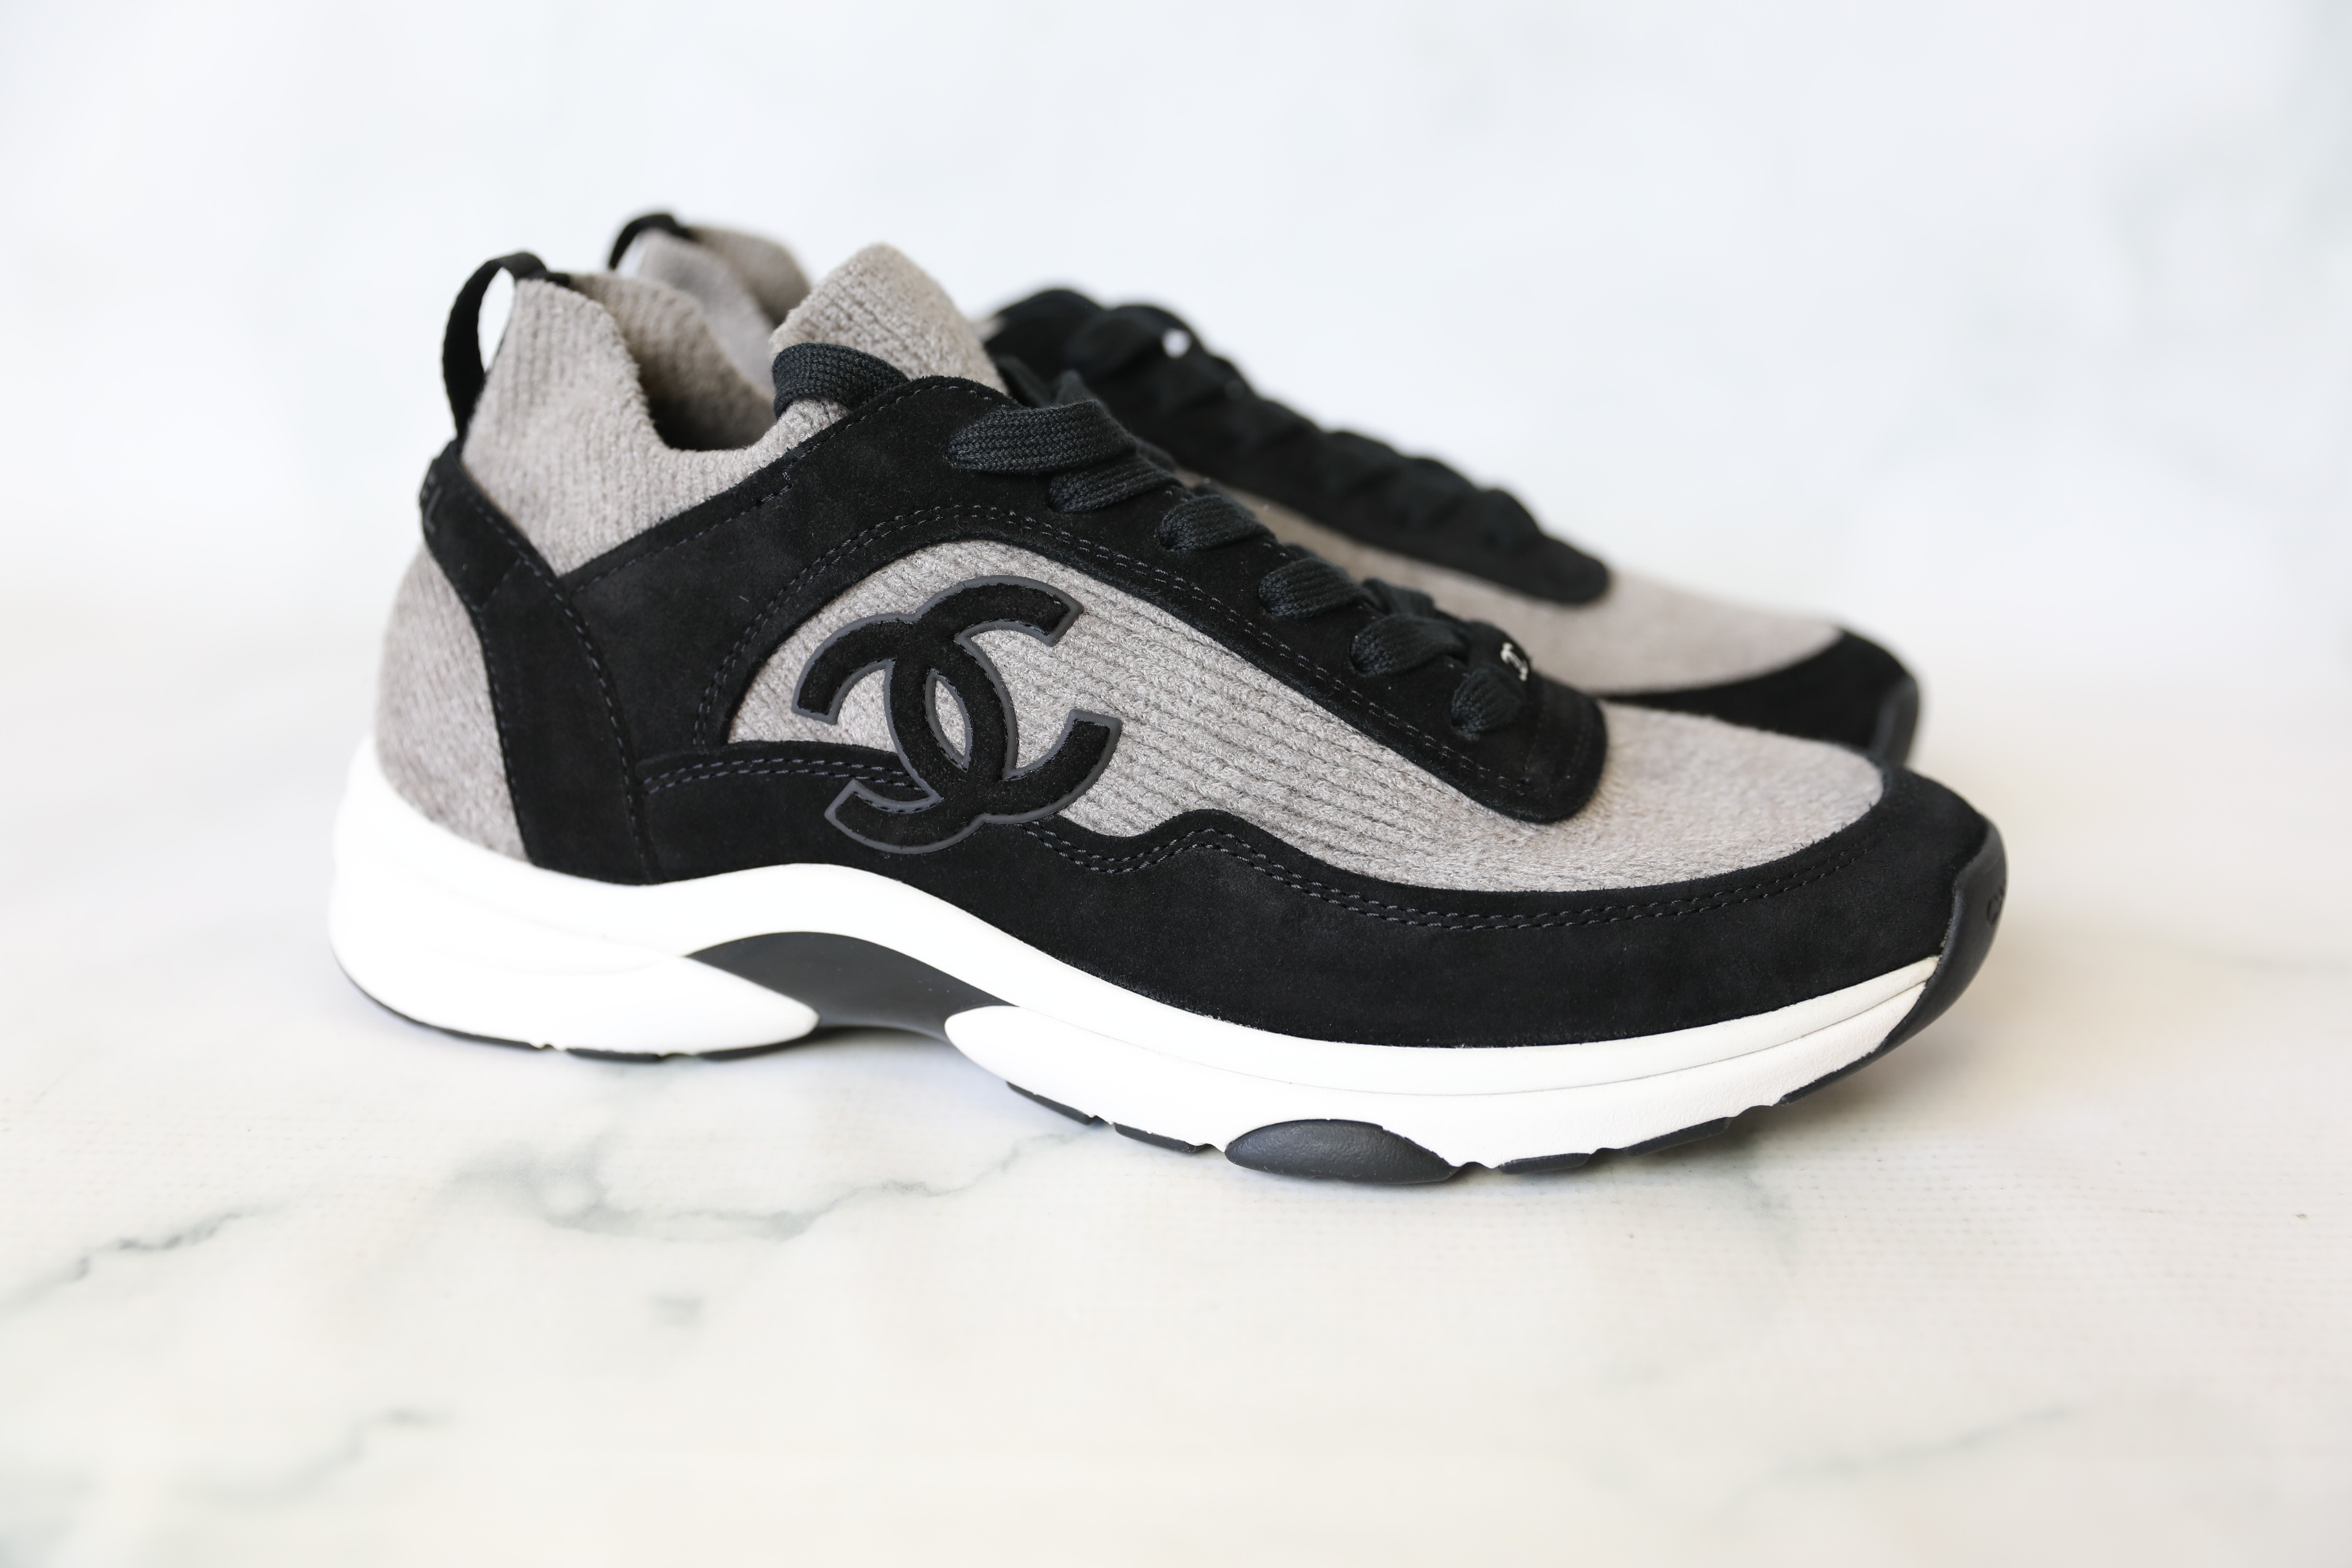 Chanel Sneakers, Black Suede with Tan Knit, Size 40.5, New in Box WA001